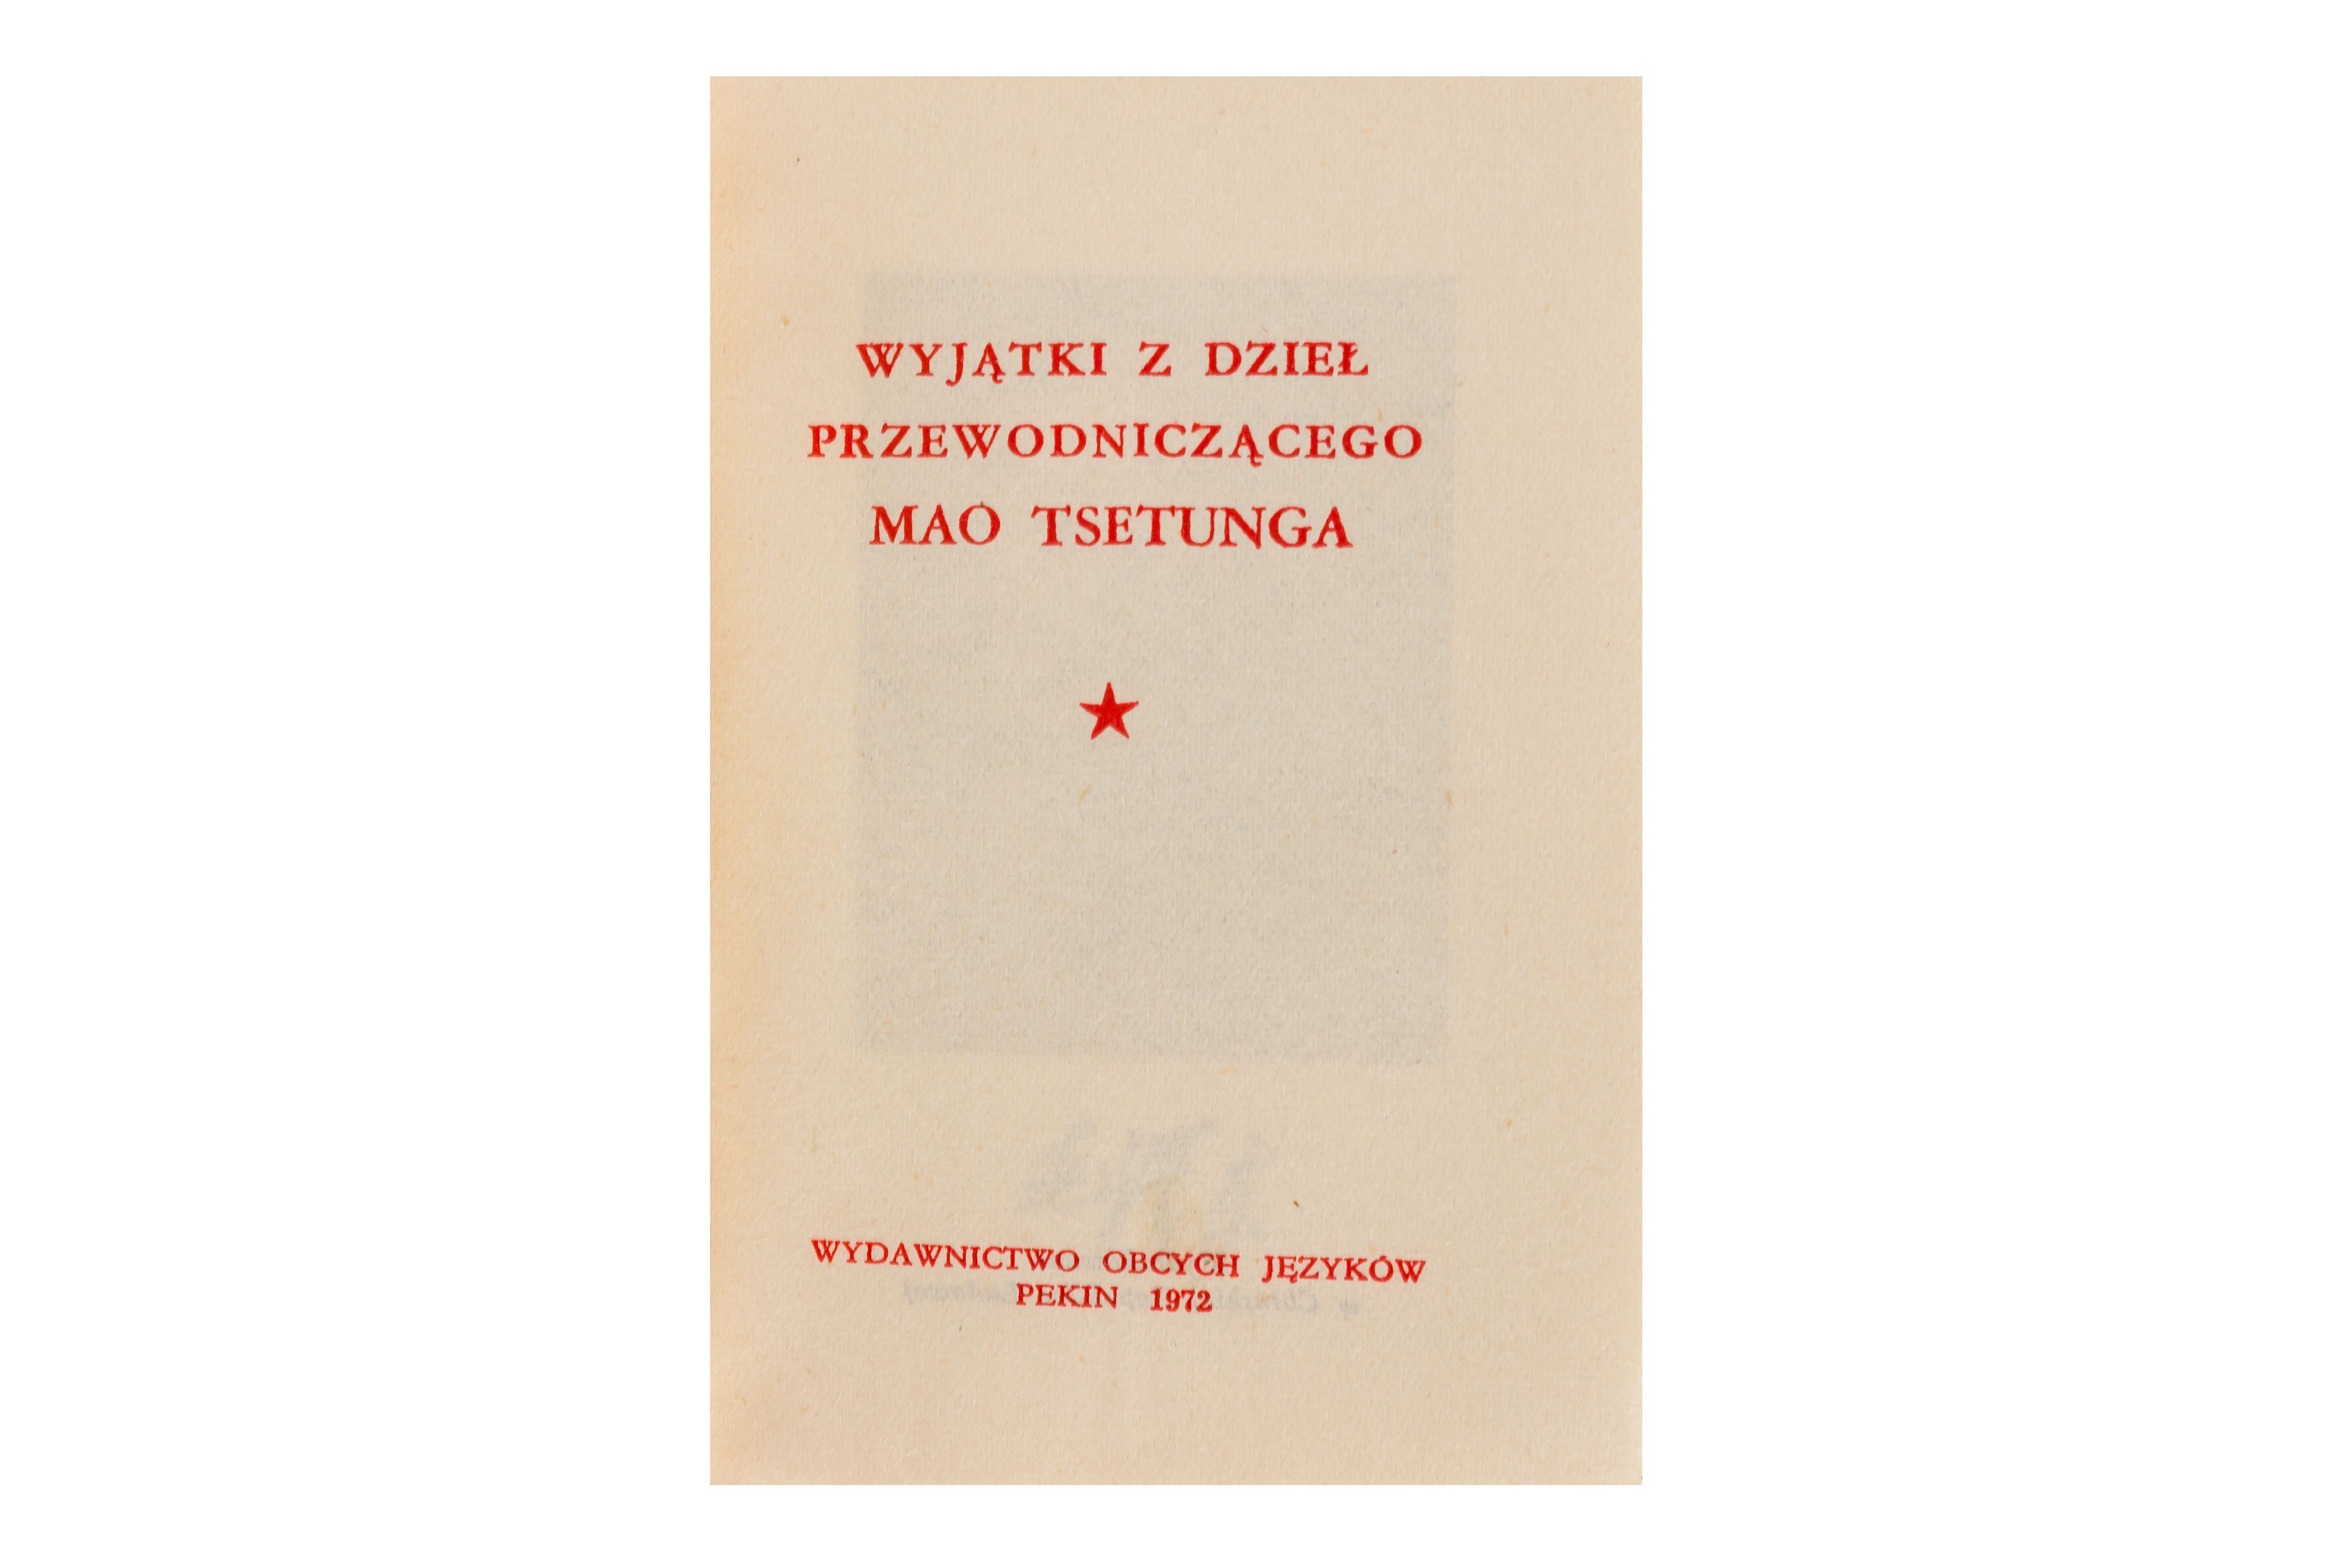 Mao Tse-Tung: Quotations From Chairman Mao Tse-Tung [Little Red Book] - Image 4 of 13